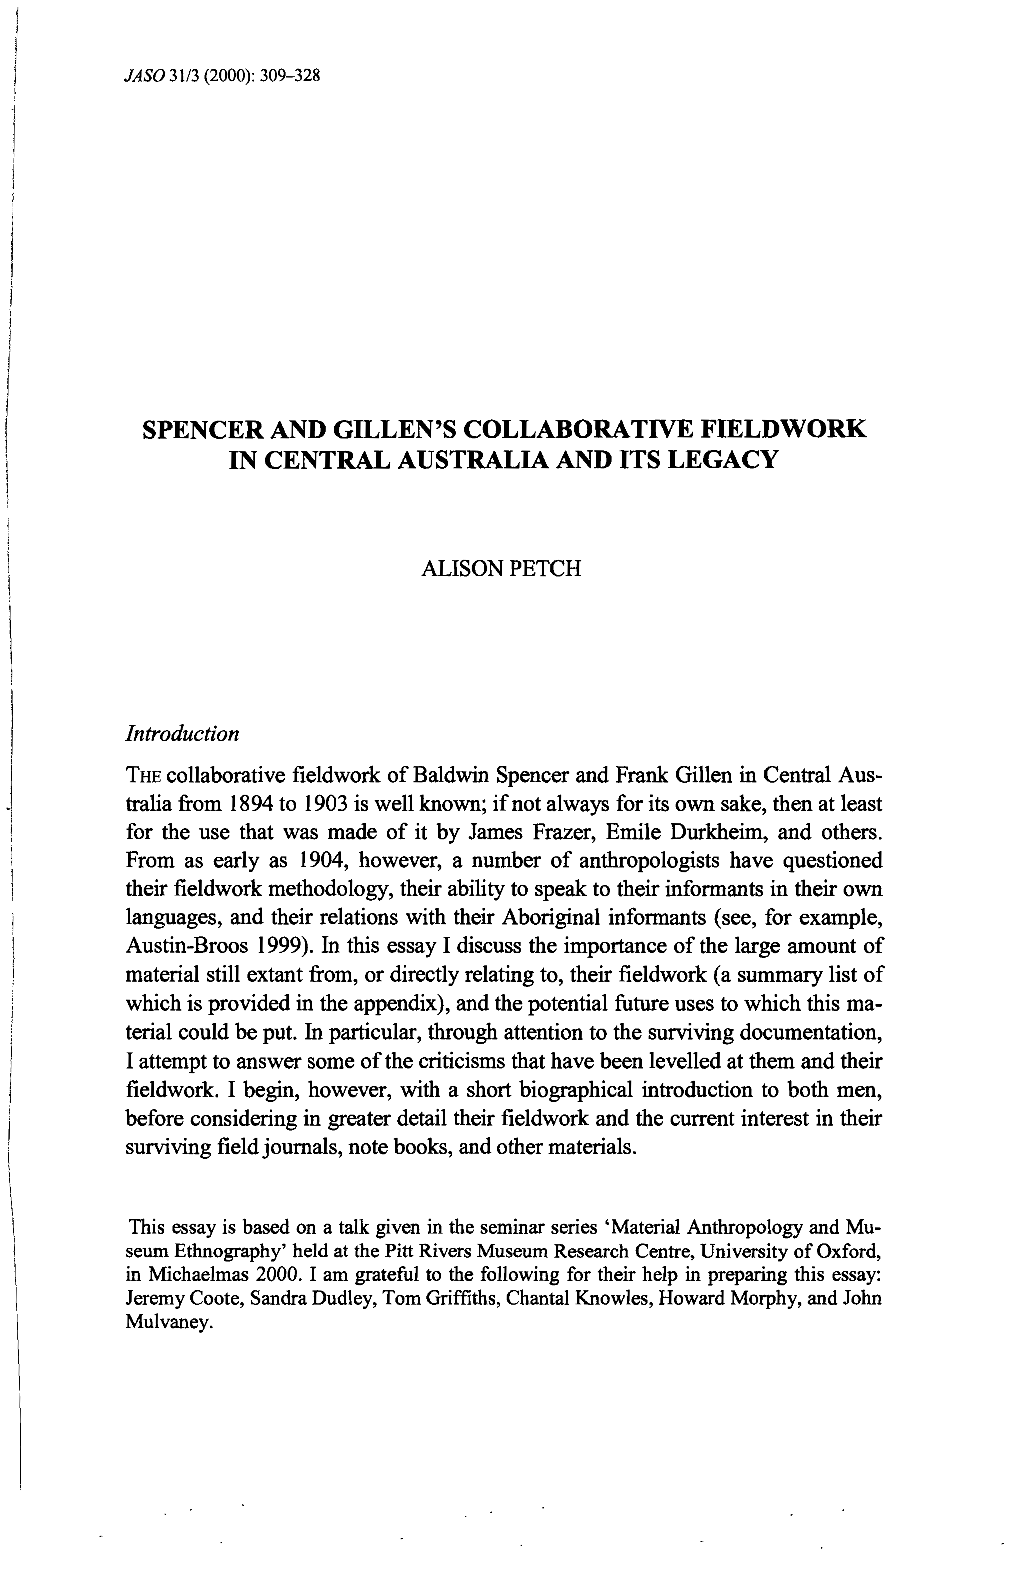 Spencer and Gillen's Collaborative Fieldwork in Central Australia and Its Legacy